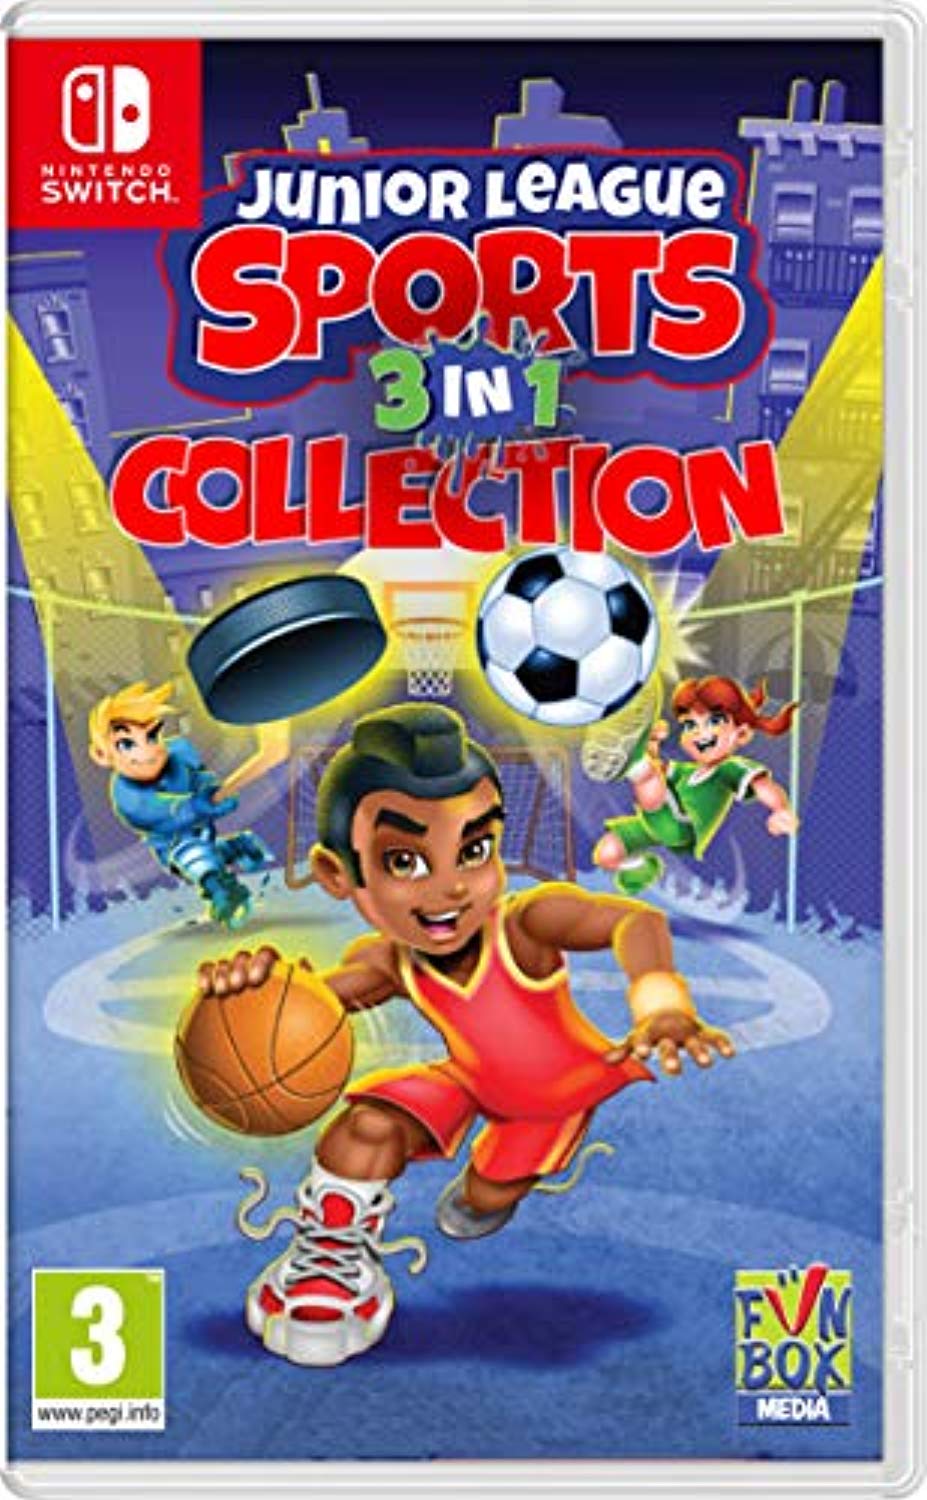 Junior League Sports 3-in-1 Collection (Nintendo Switch) - Offer Games